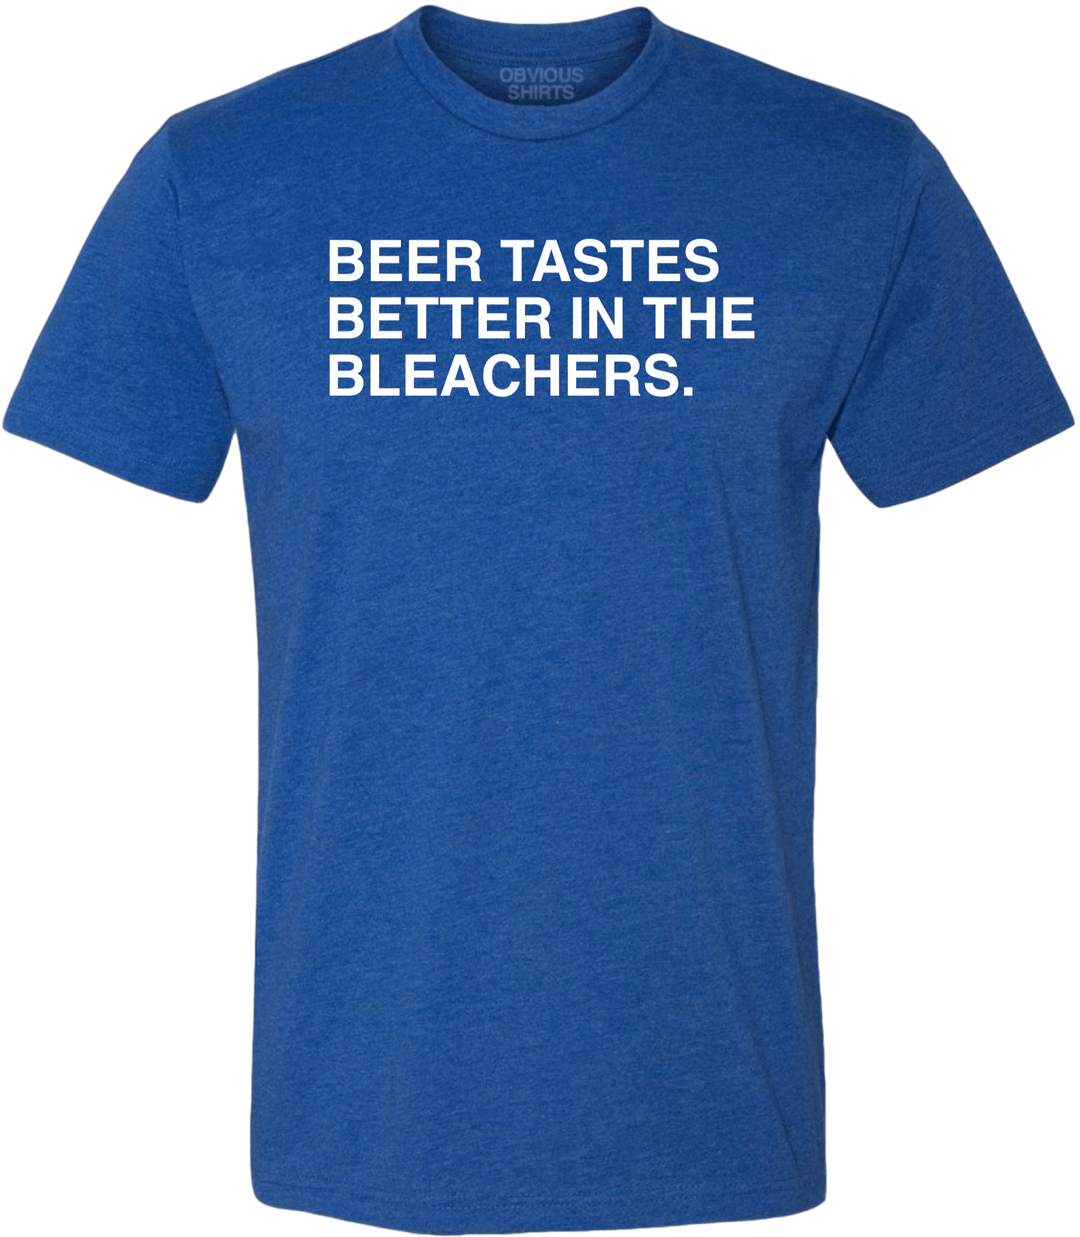 BEER TASTES BETTER IN THE BLEACHERS. - OBVIOUS SHIRTS.